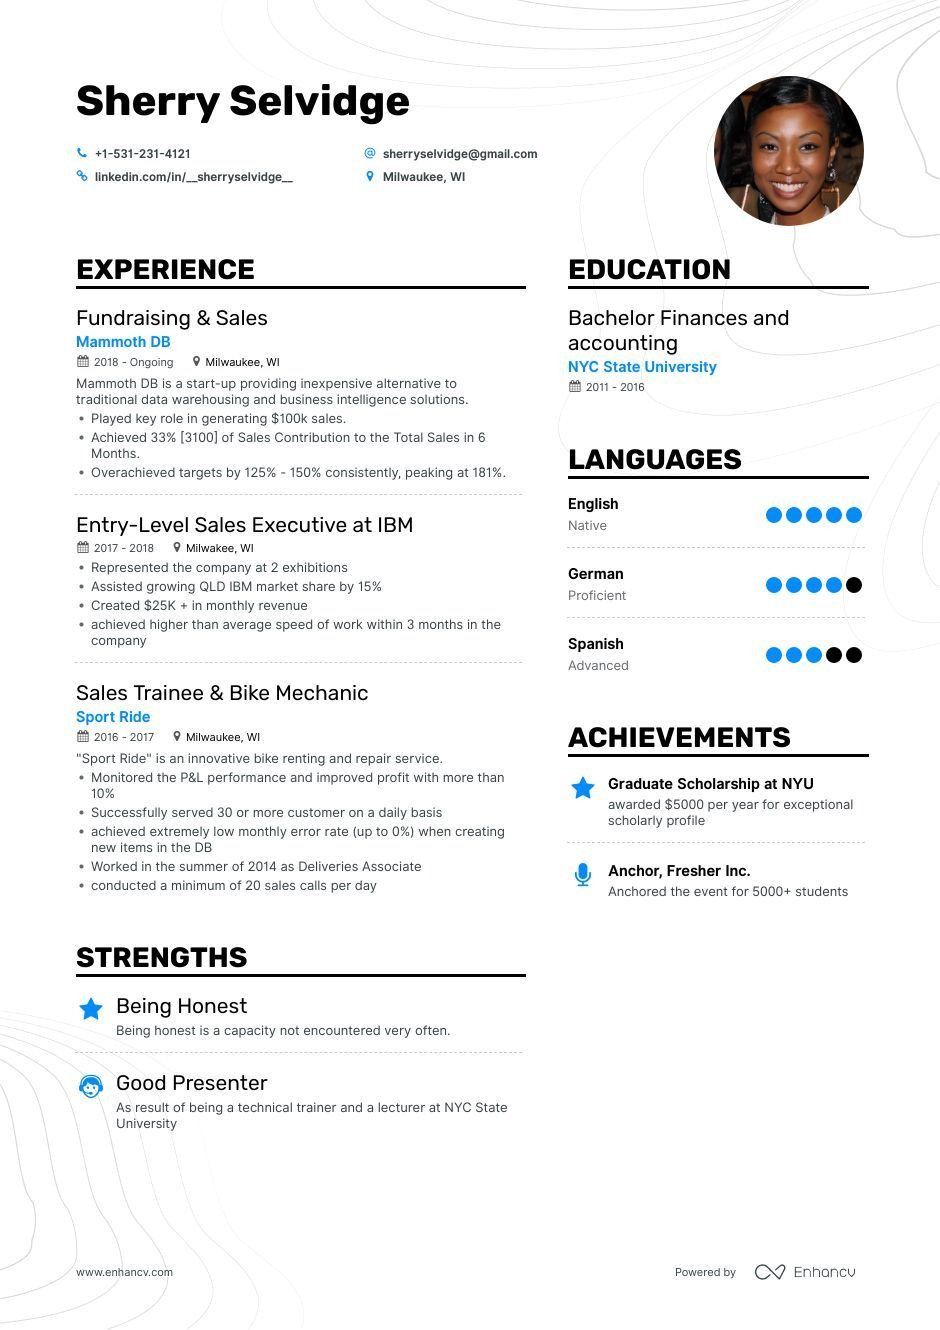 Sample Resume for Entry Level Sales Representative 6lancarrezekiq Entry Level Sales Resume Examples [adapted for 2019] Sales …